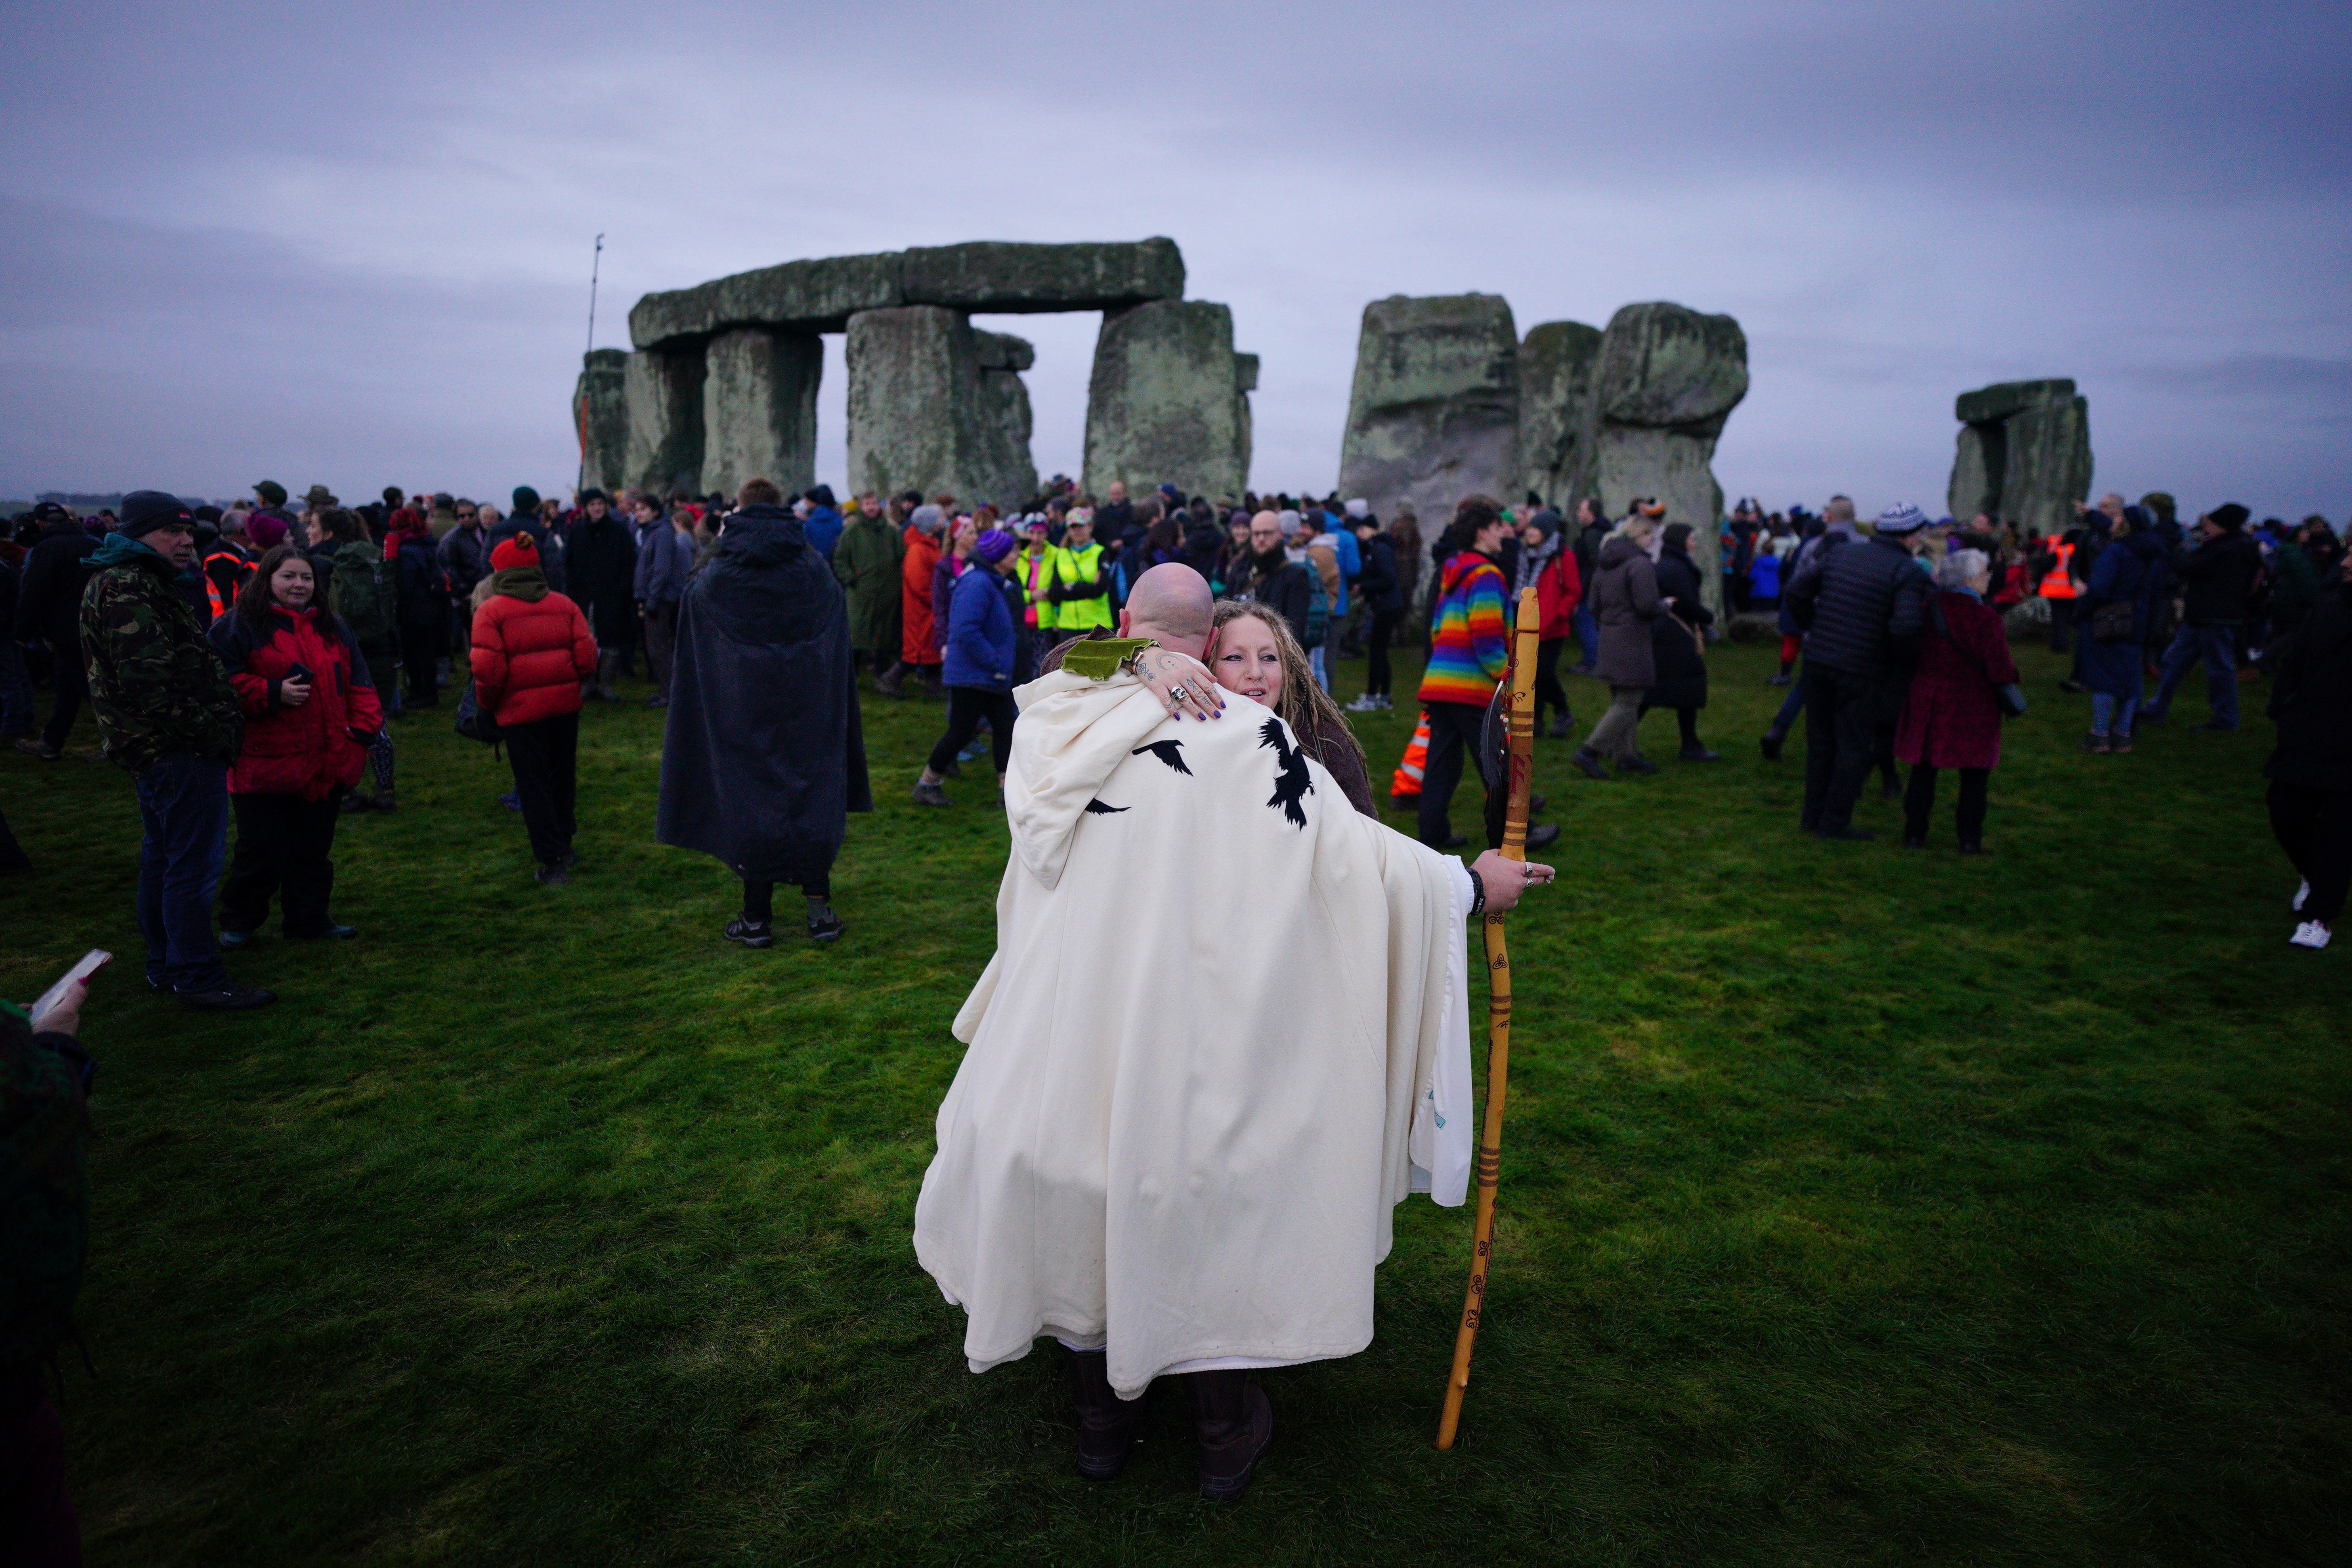 People take part in the winter solstice celebrations during sunrise at Stonehenge (Ben Birchall/PA)